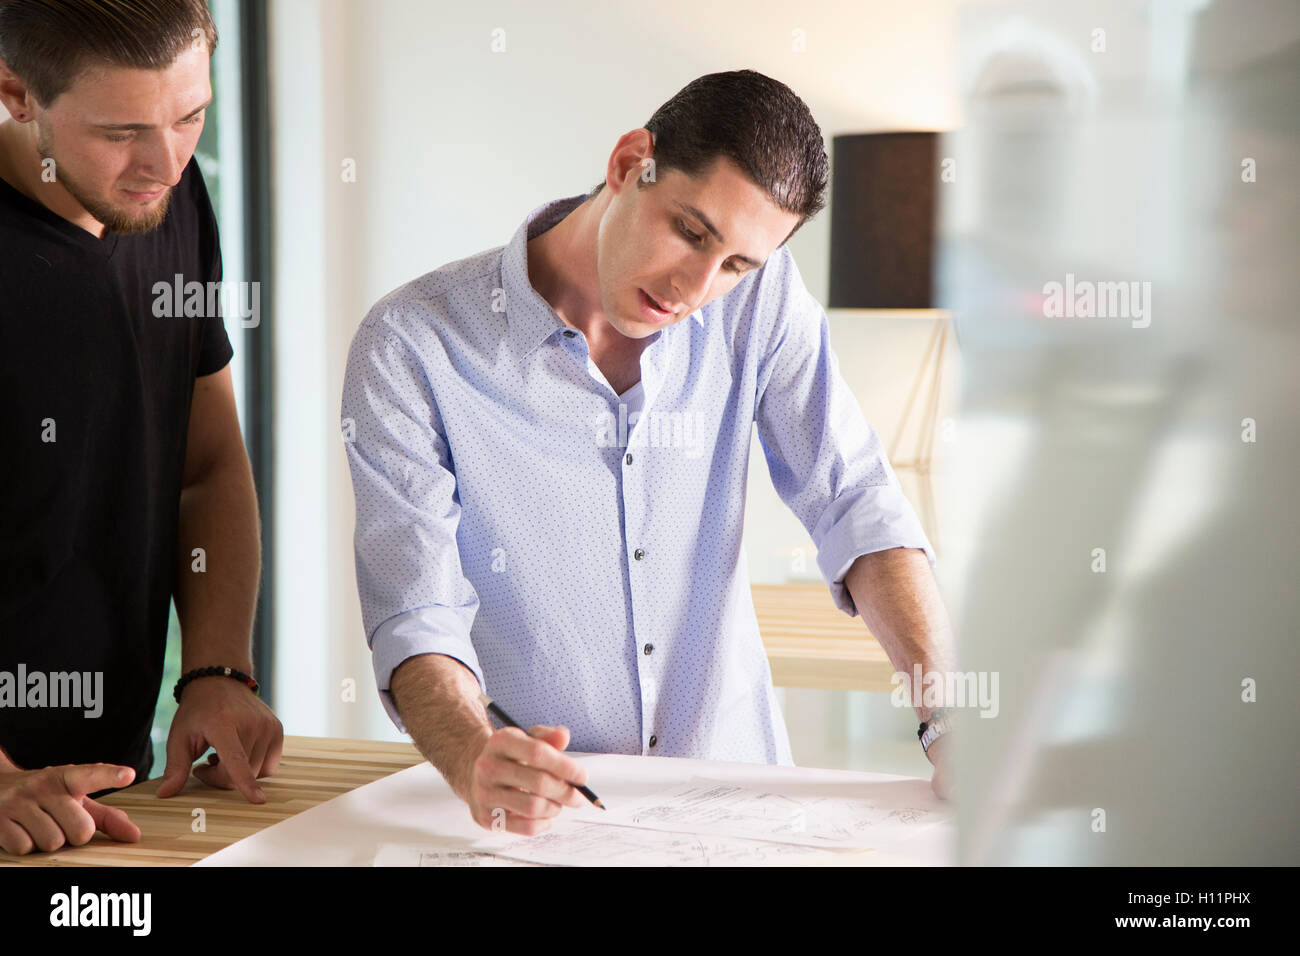 Two male office workers sharing ideas in a modern office Stock Photo